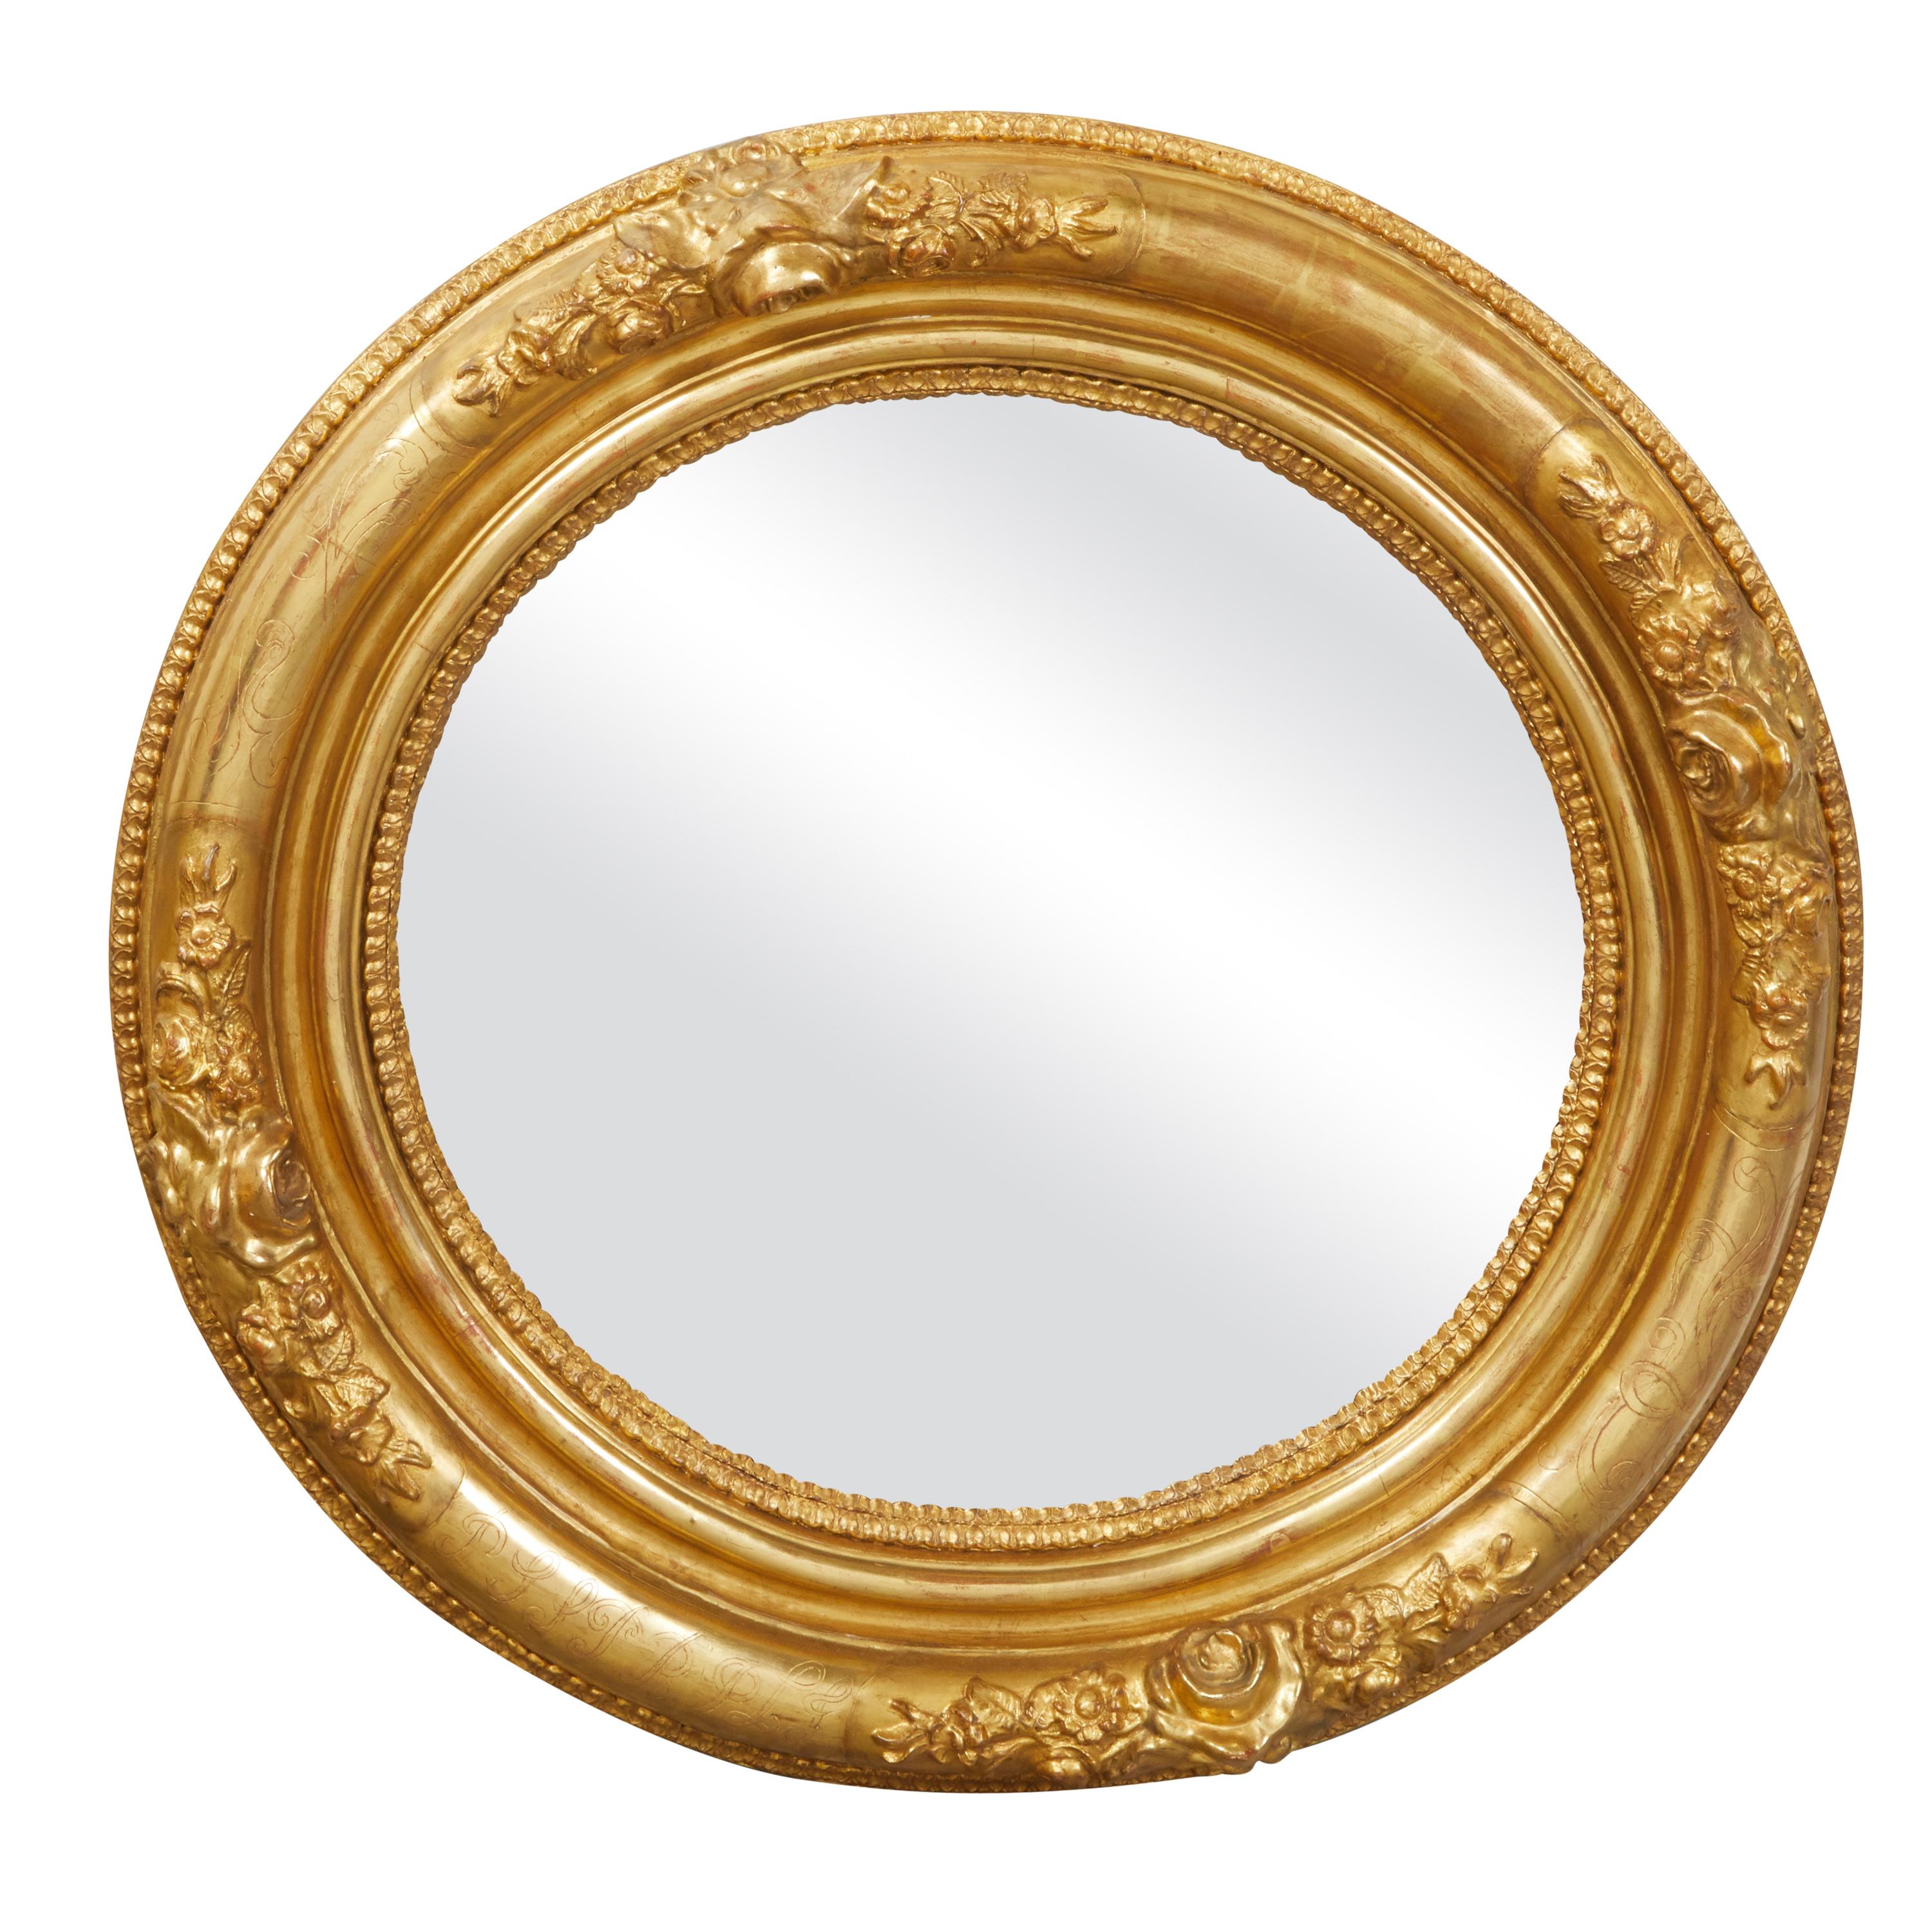 English 19th Century Round Giltwood Mirror with Carved Flowers and Etched Motifs In Good Condition For Sale In Atlanta, GA